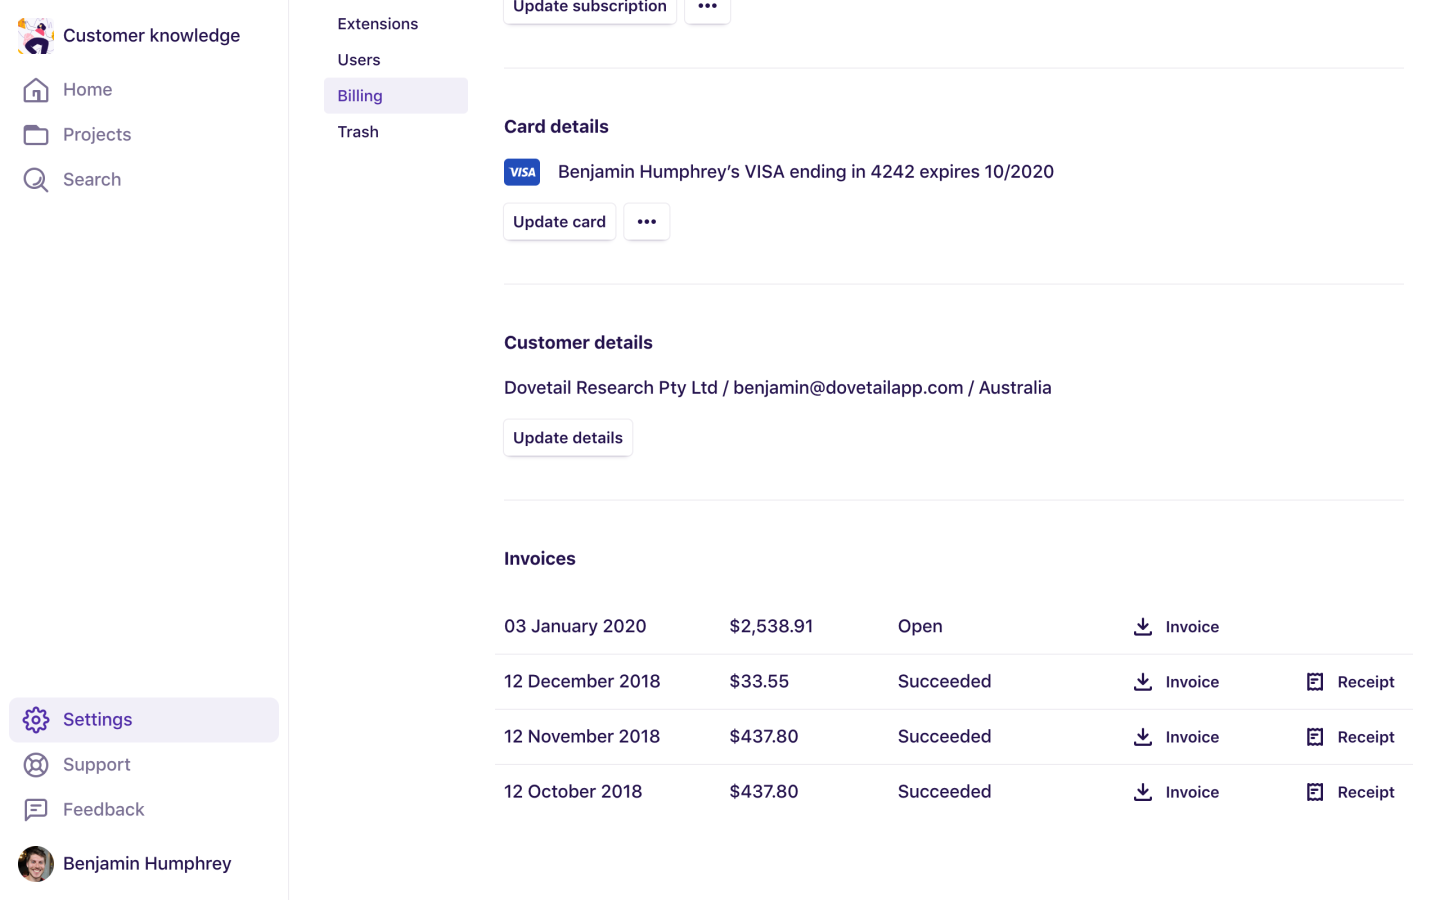 Customers can now download their own invoices in Dovetail’s billing screen.